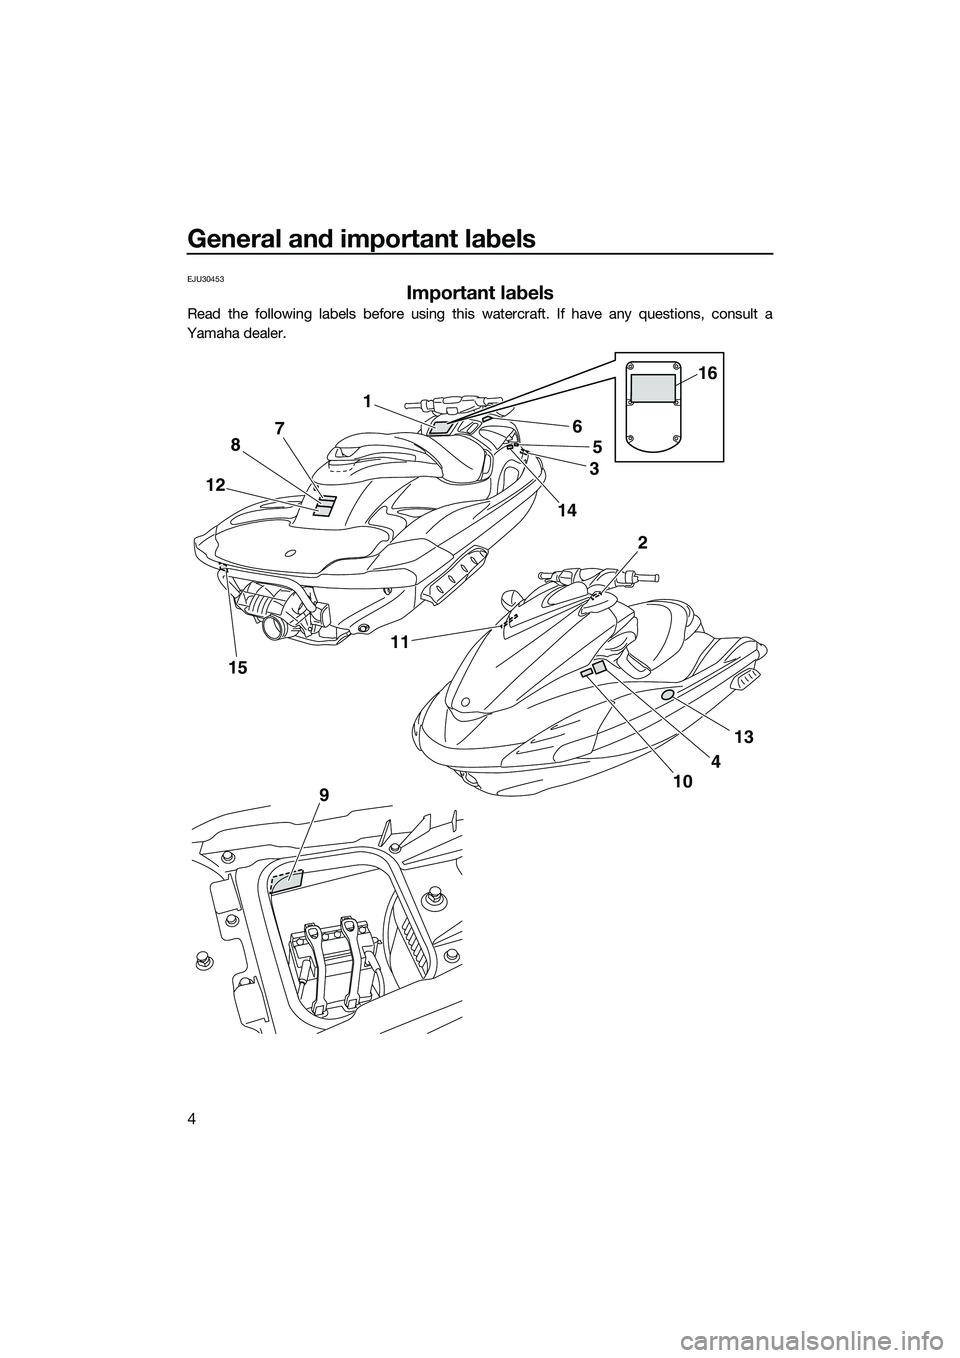 YAMAHA FZR SVHO 2014  Owners Manual General and important labels
4
EJU30453
Important labels
Read the following labels before using this watercraft. If have any questions, consult a
Yamaha dealer.
1
5
4
10
6
8 7
12
15 11
13
2
9
16
3
14
